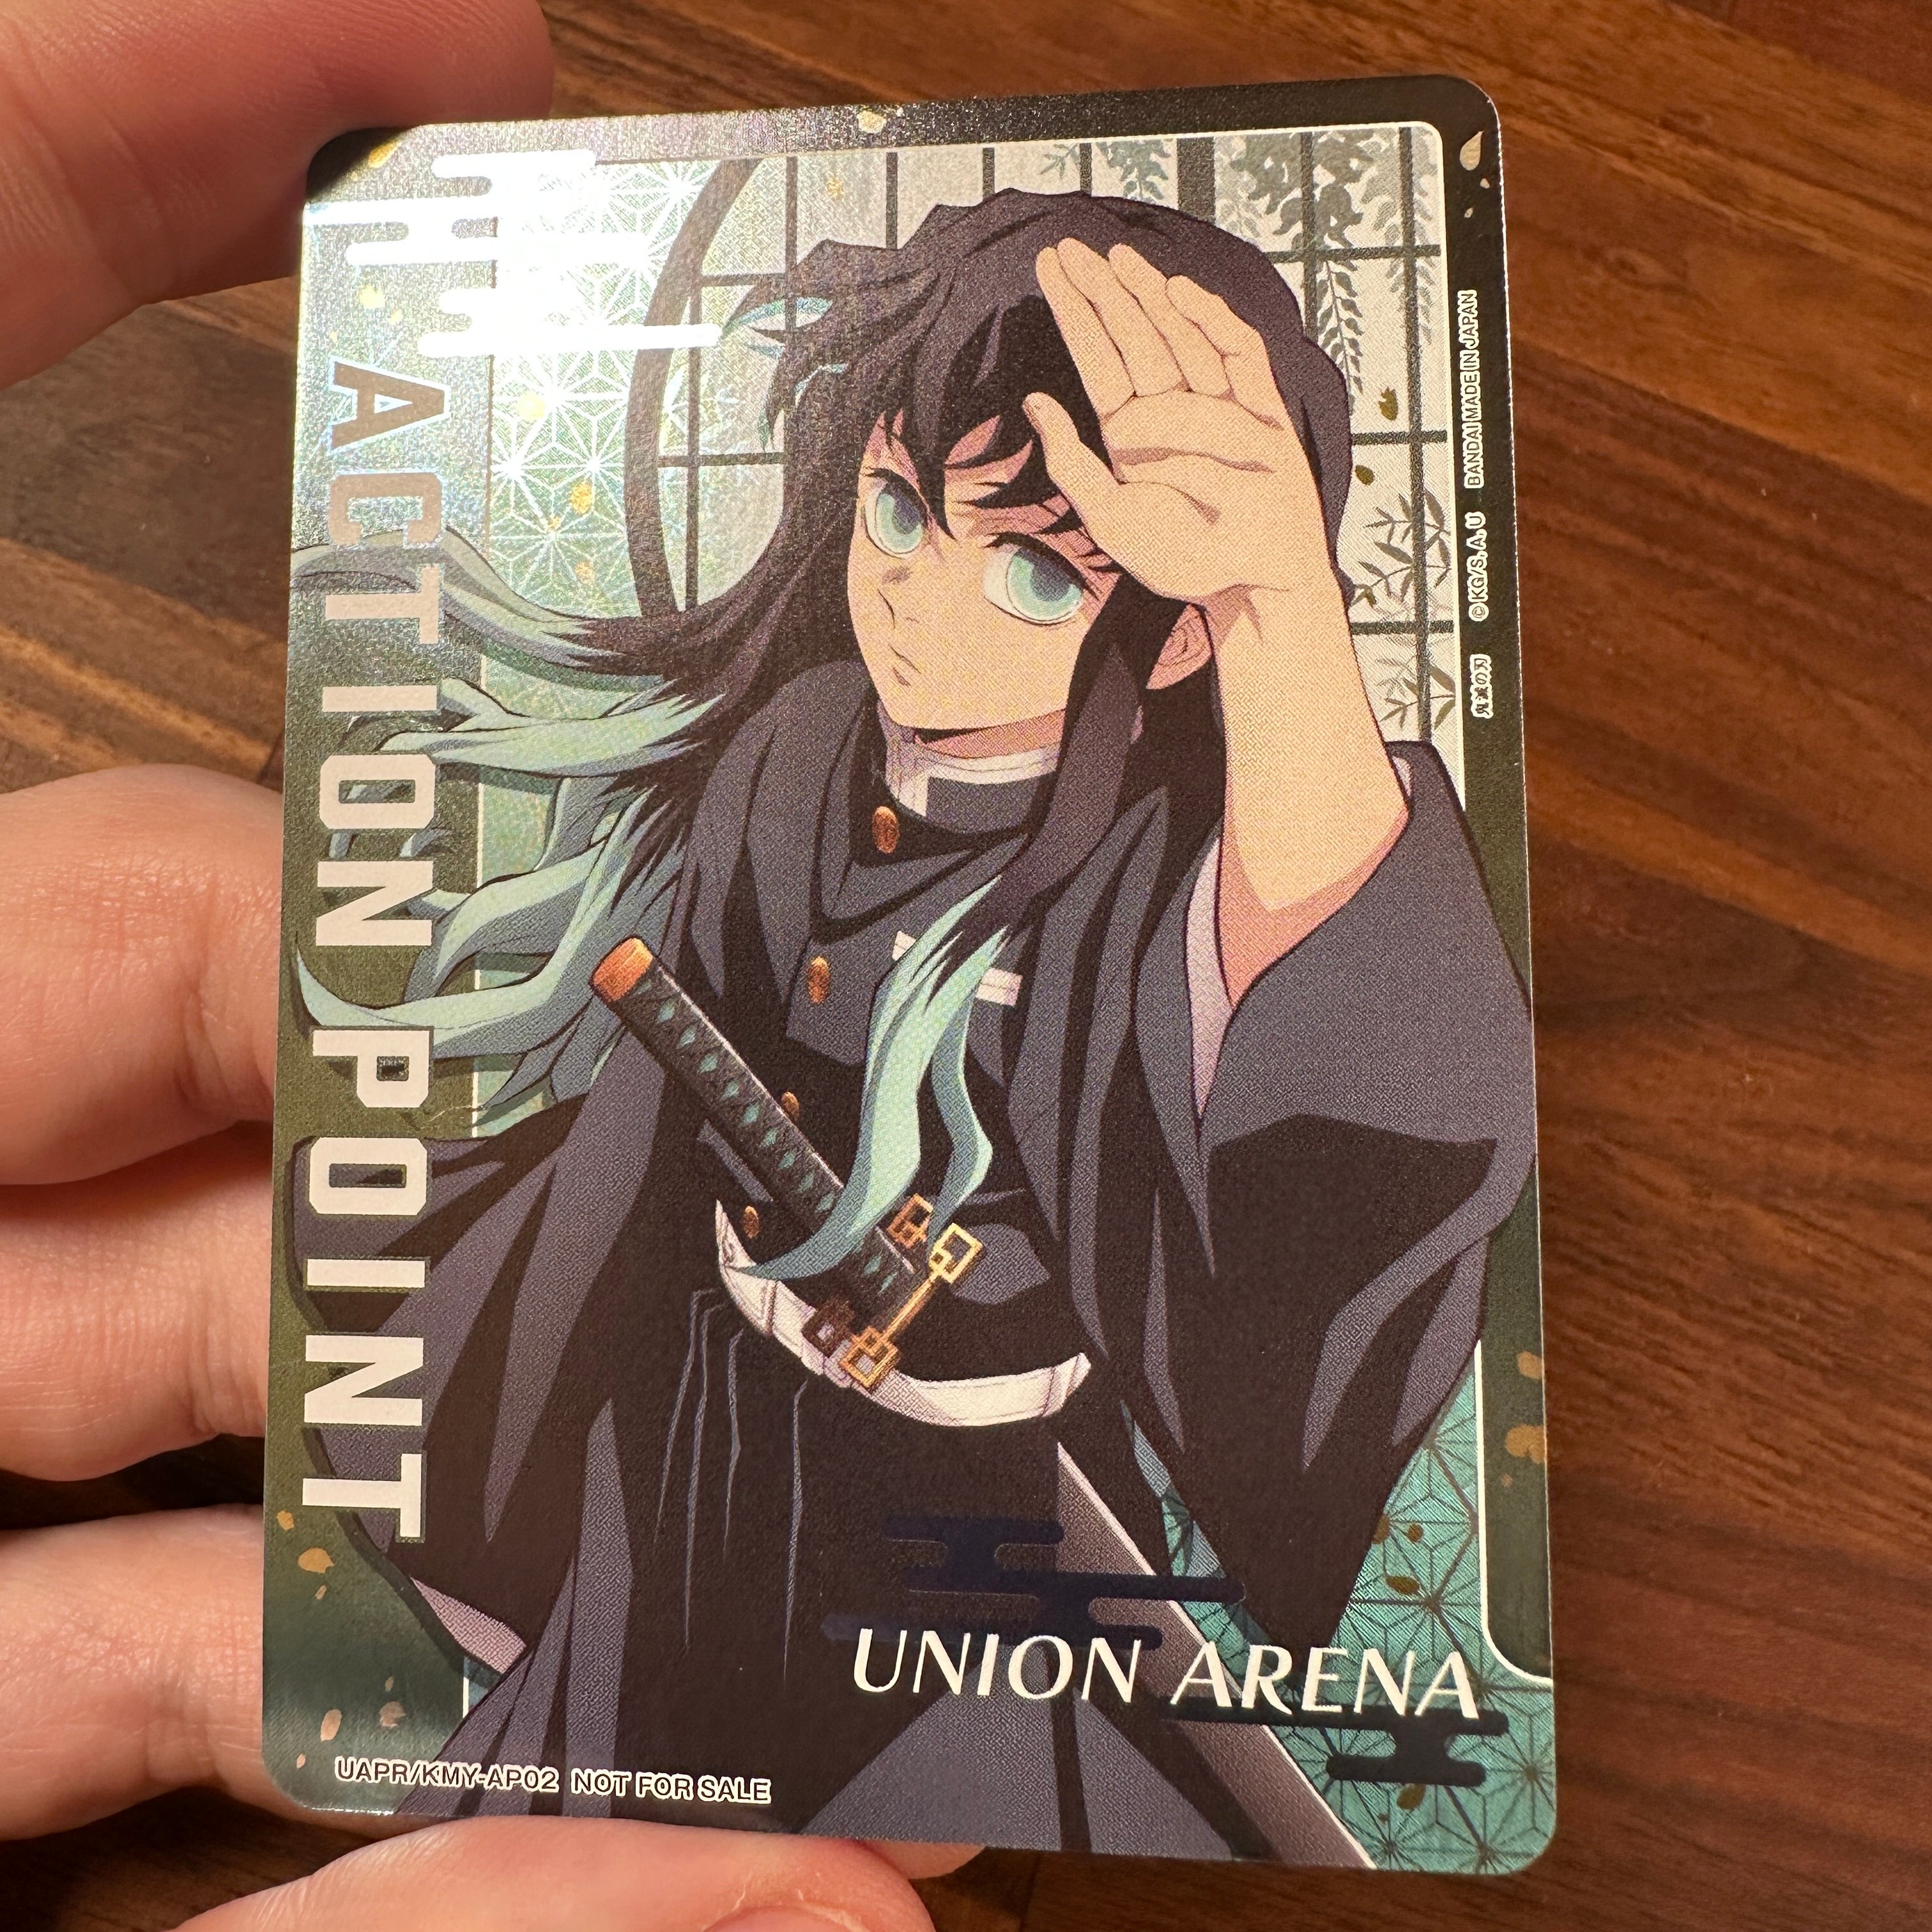 TRADING CARD GAME UNION ARENA UAPR/KMY-AP02